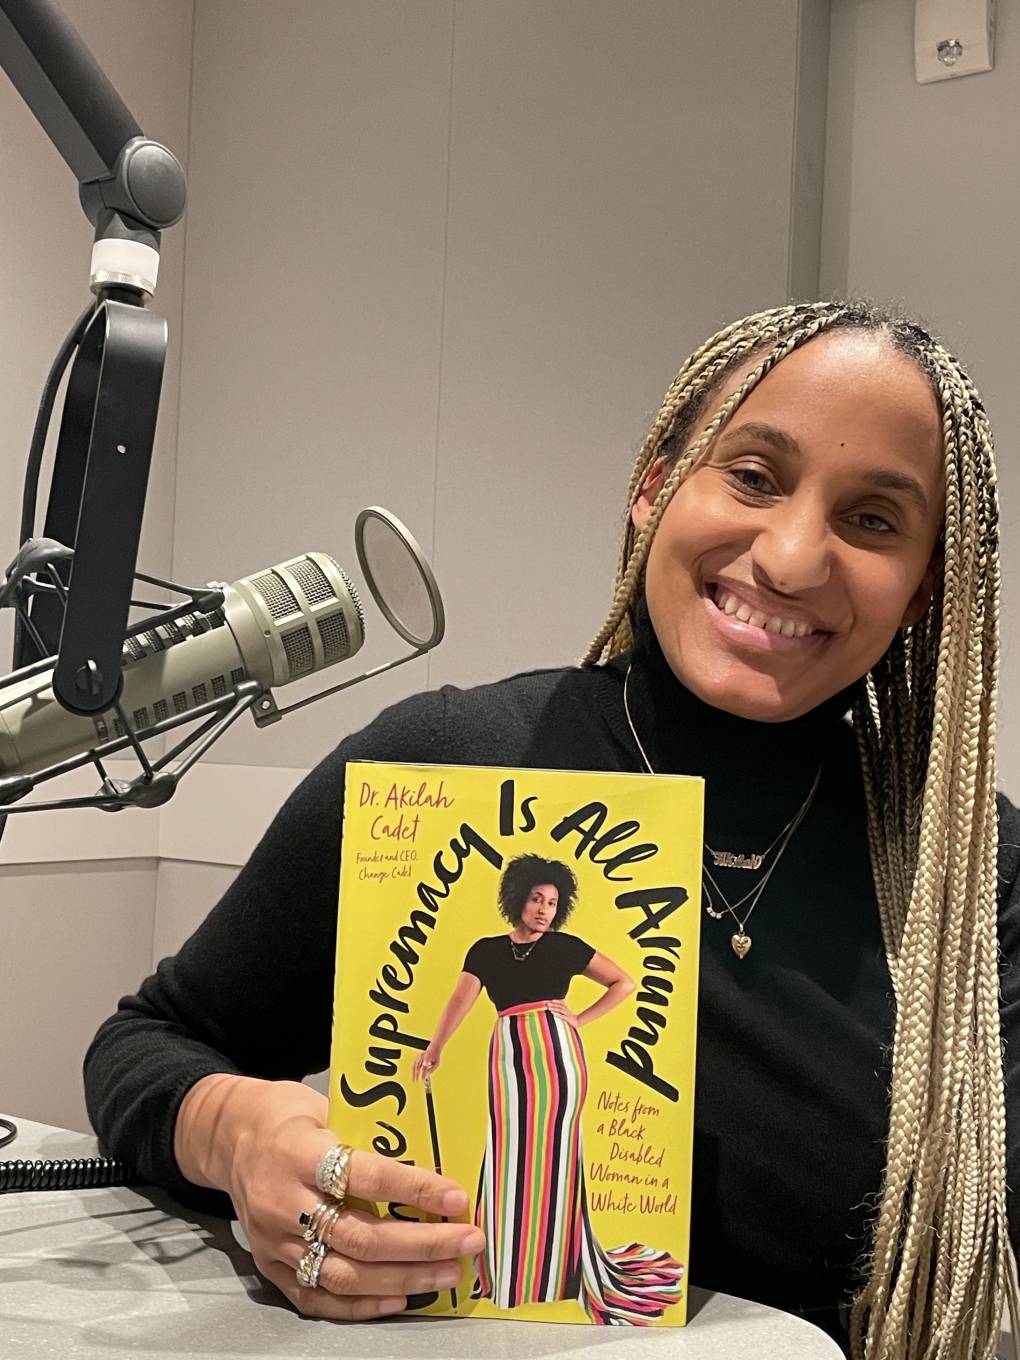 Dr. Akilah Cadet poses while sitting at KQED studios and holding a copy of her book, 'White Supremacy Is All Around: Notes from a Black Disabled Woman in a White World'.